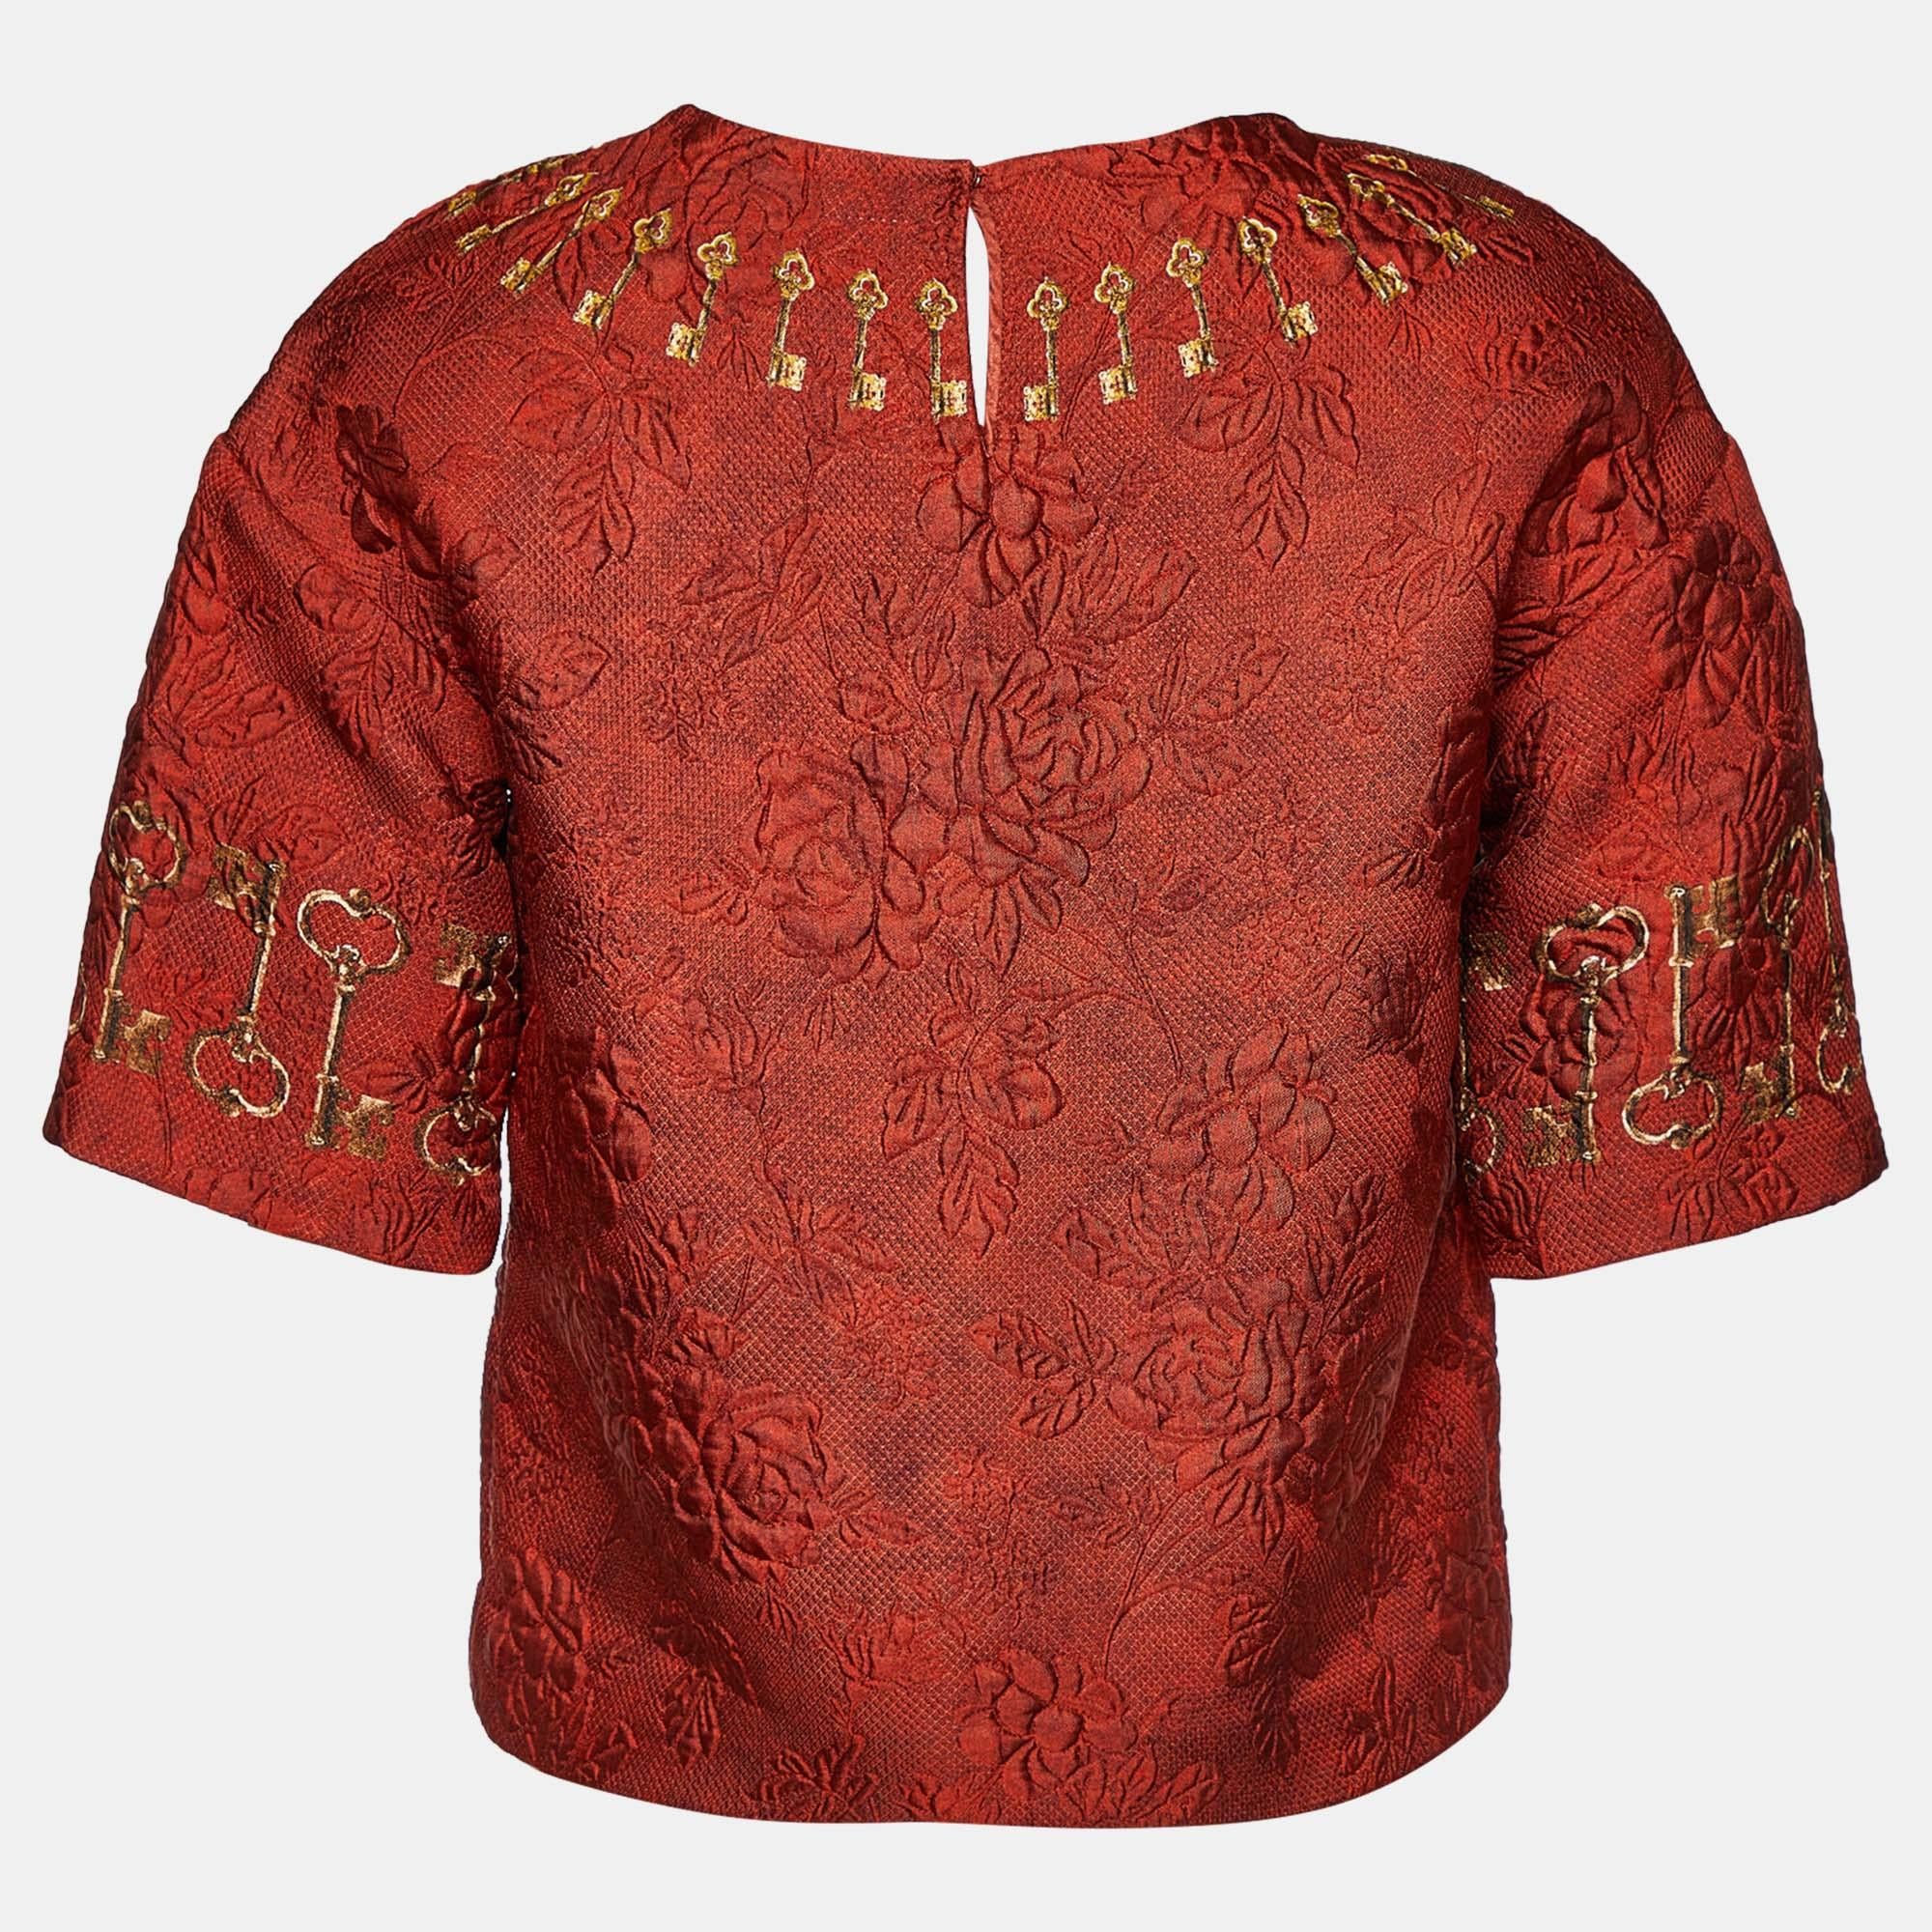 The fine artistry and the feminine silhouette of the Dolce & Gabbana blouse exhibit the label's impeccable craftsmanship in tailoring. It is stitched using quality materials, has a good fit, and can be easily styled with chic accessories, open-toe